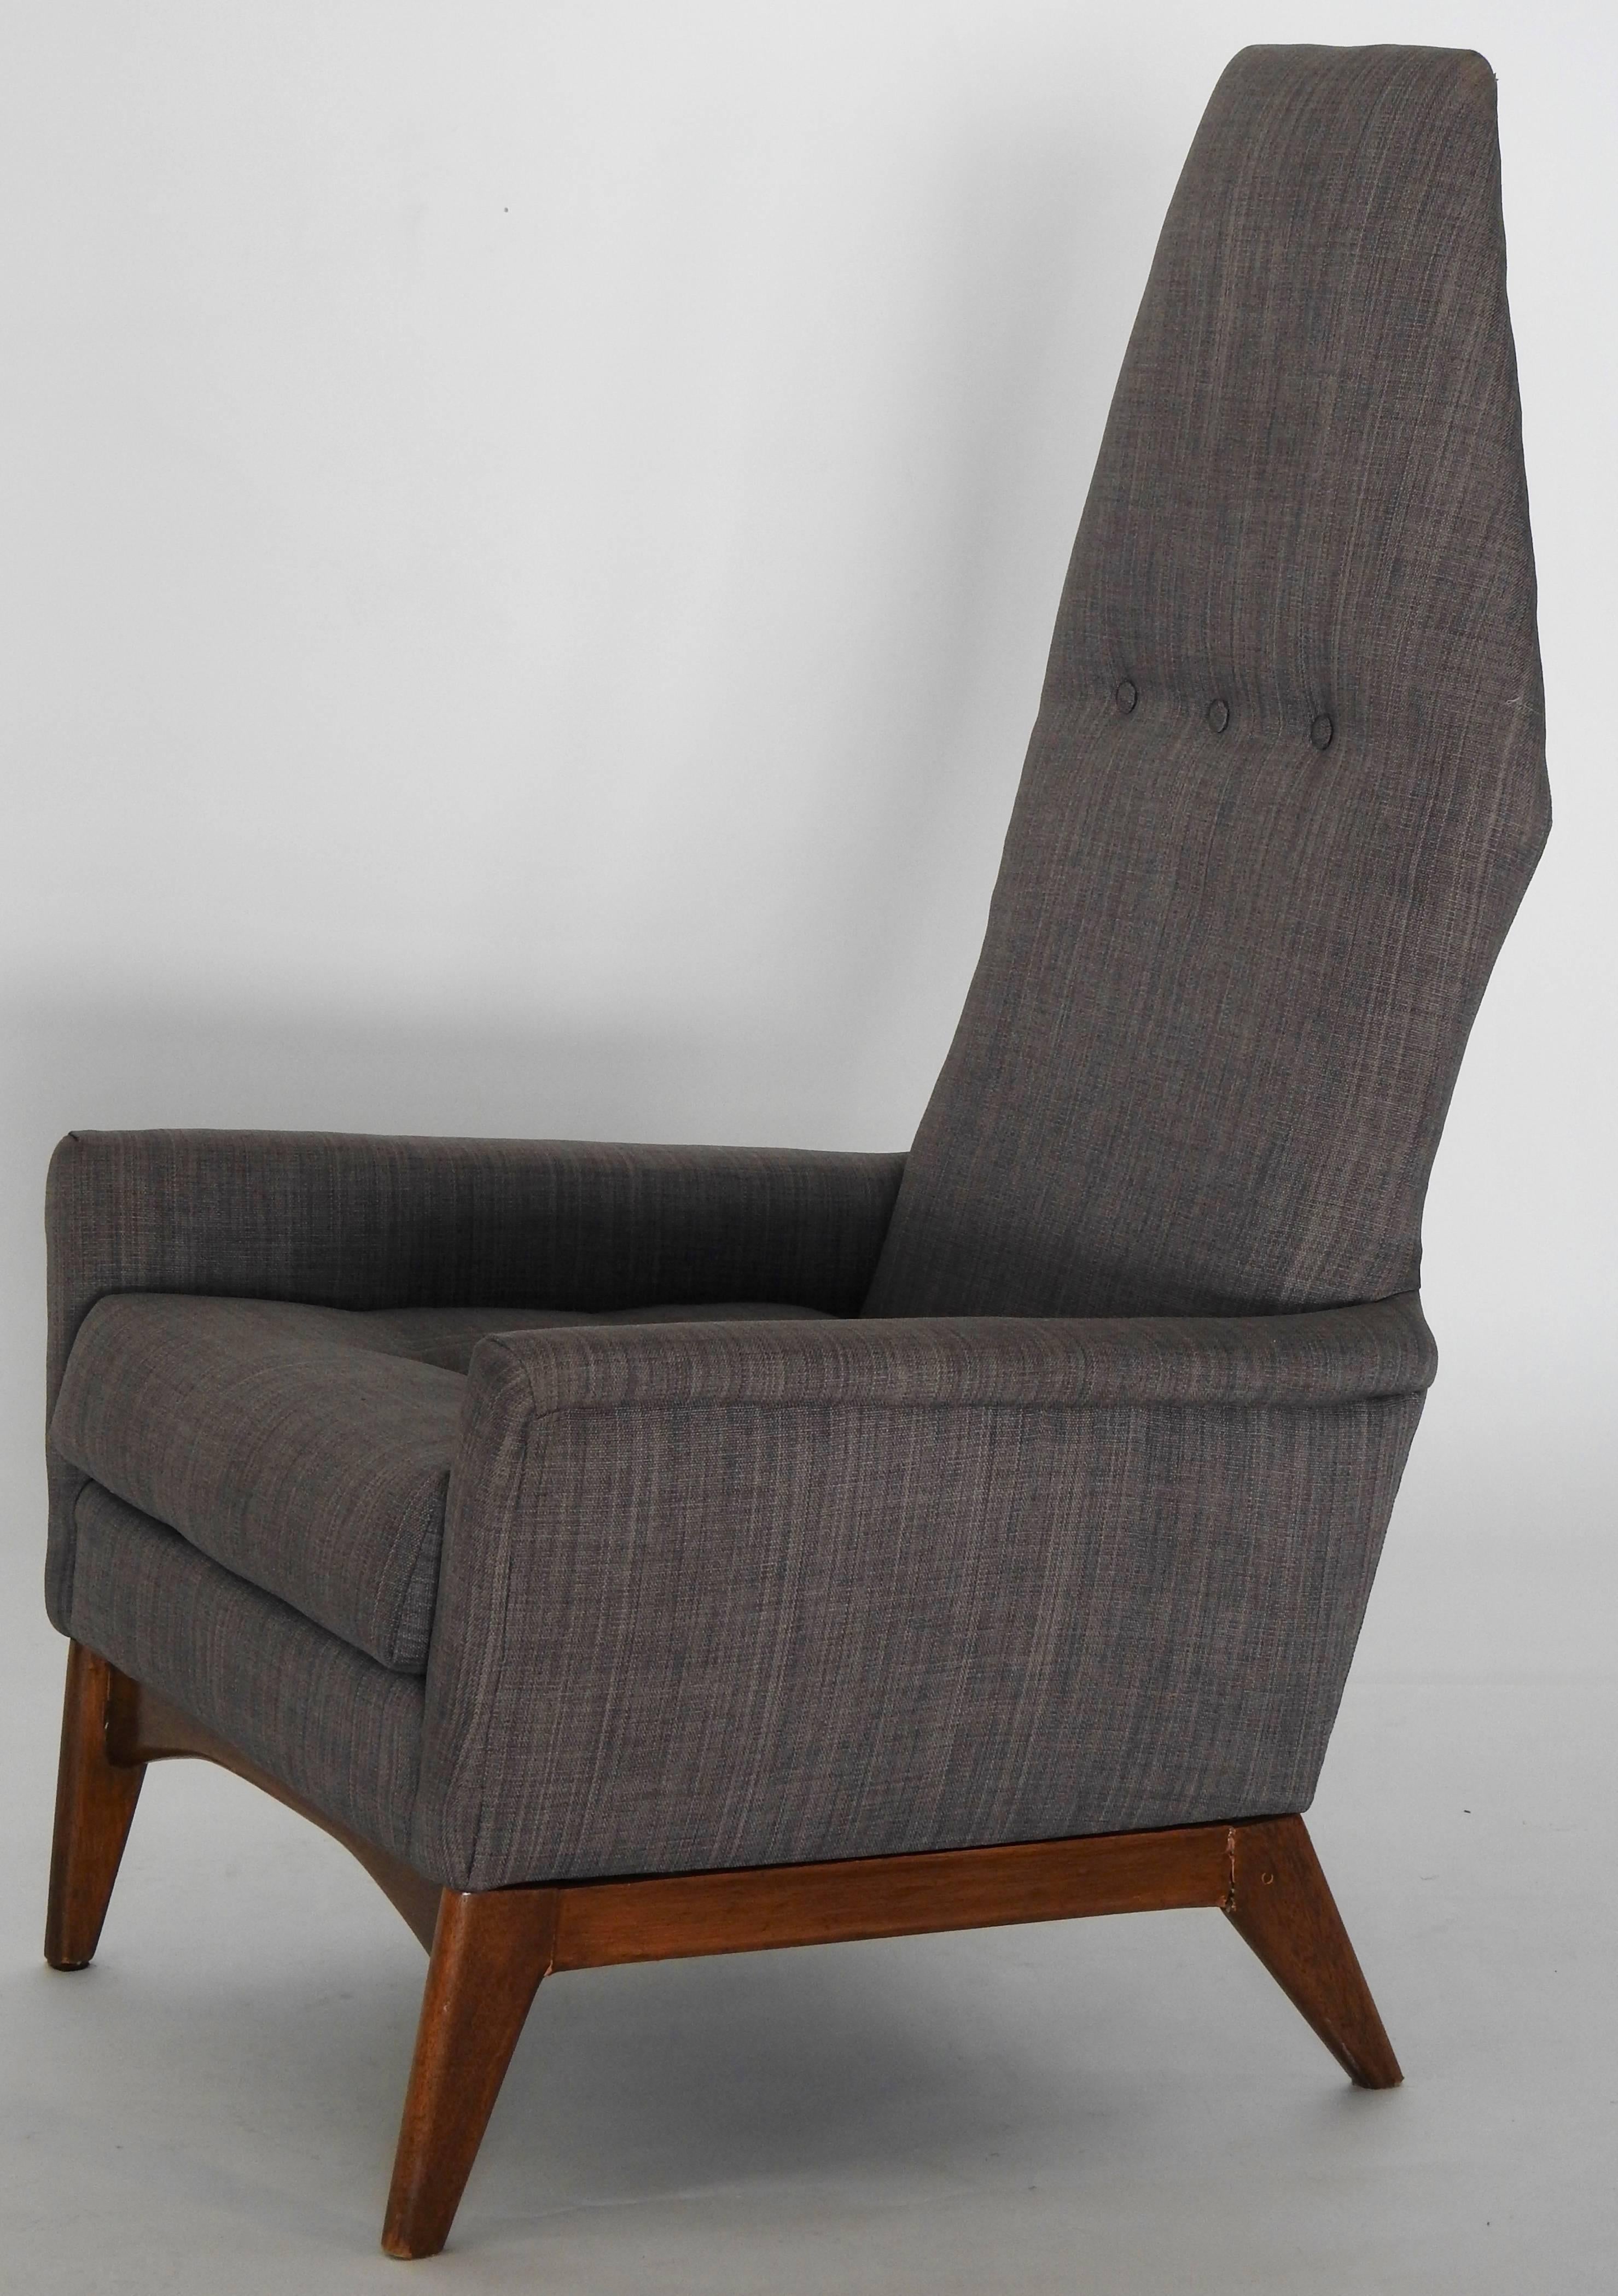 20th Century Mid-Century Adrian Pearsall High-Back Lounge Chair